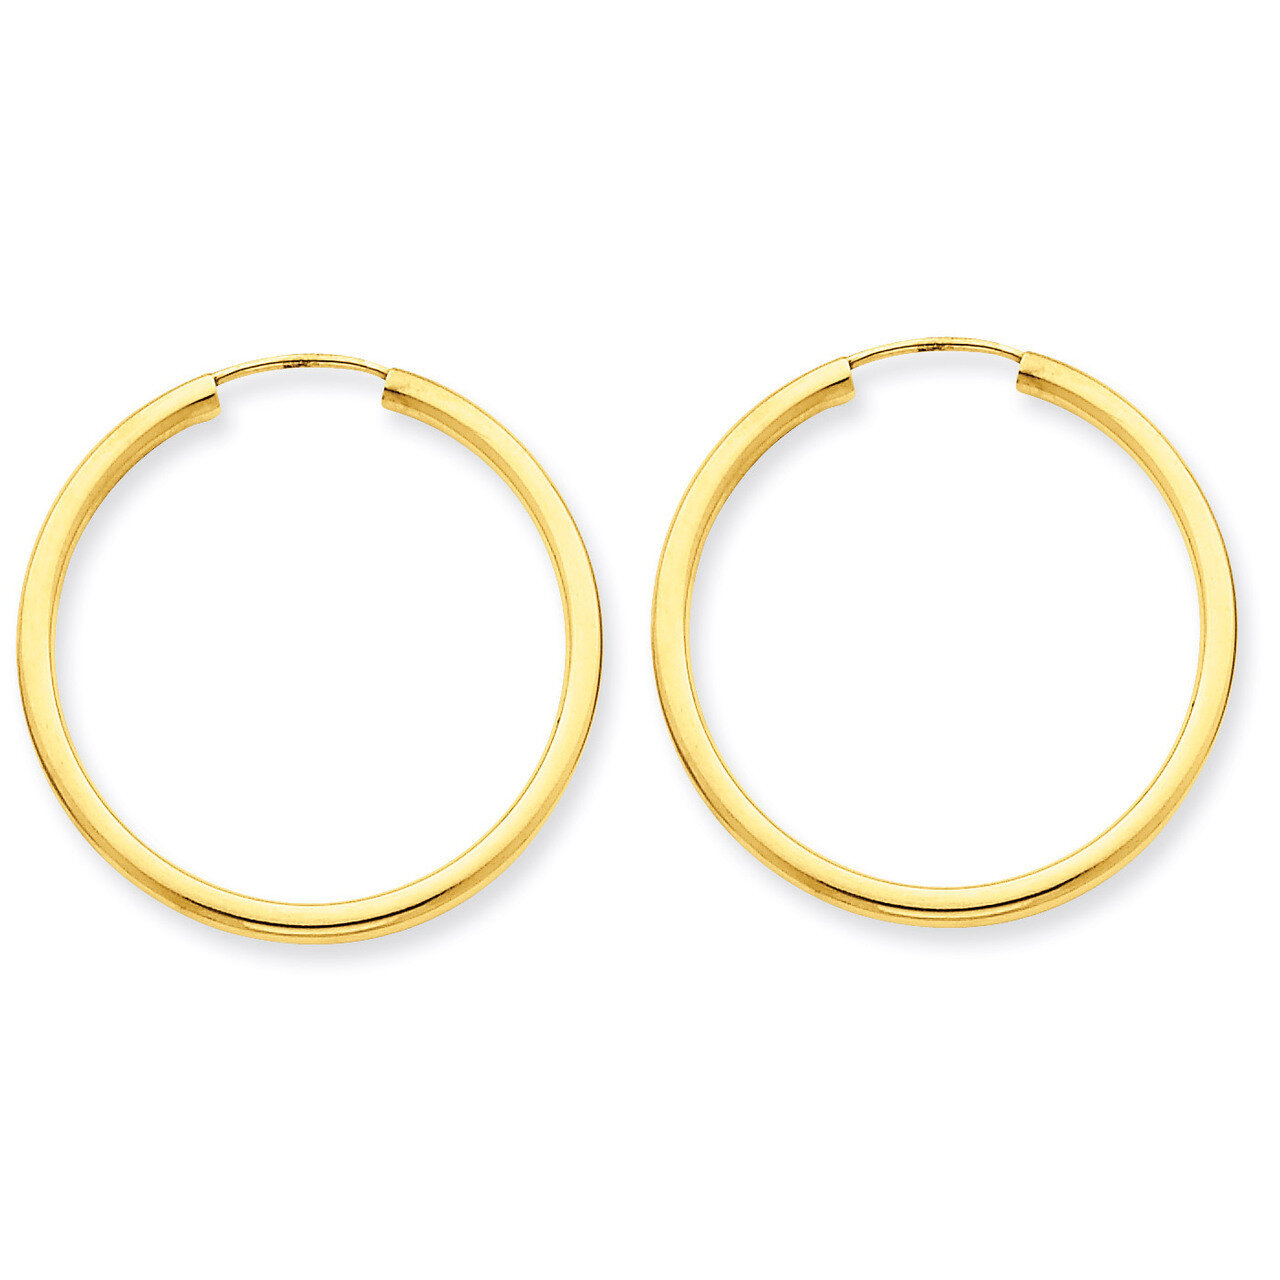 Round Endless 2mm Hoop Earrings 14k Gold Polished H981